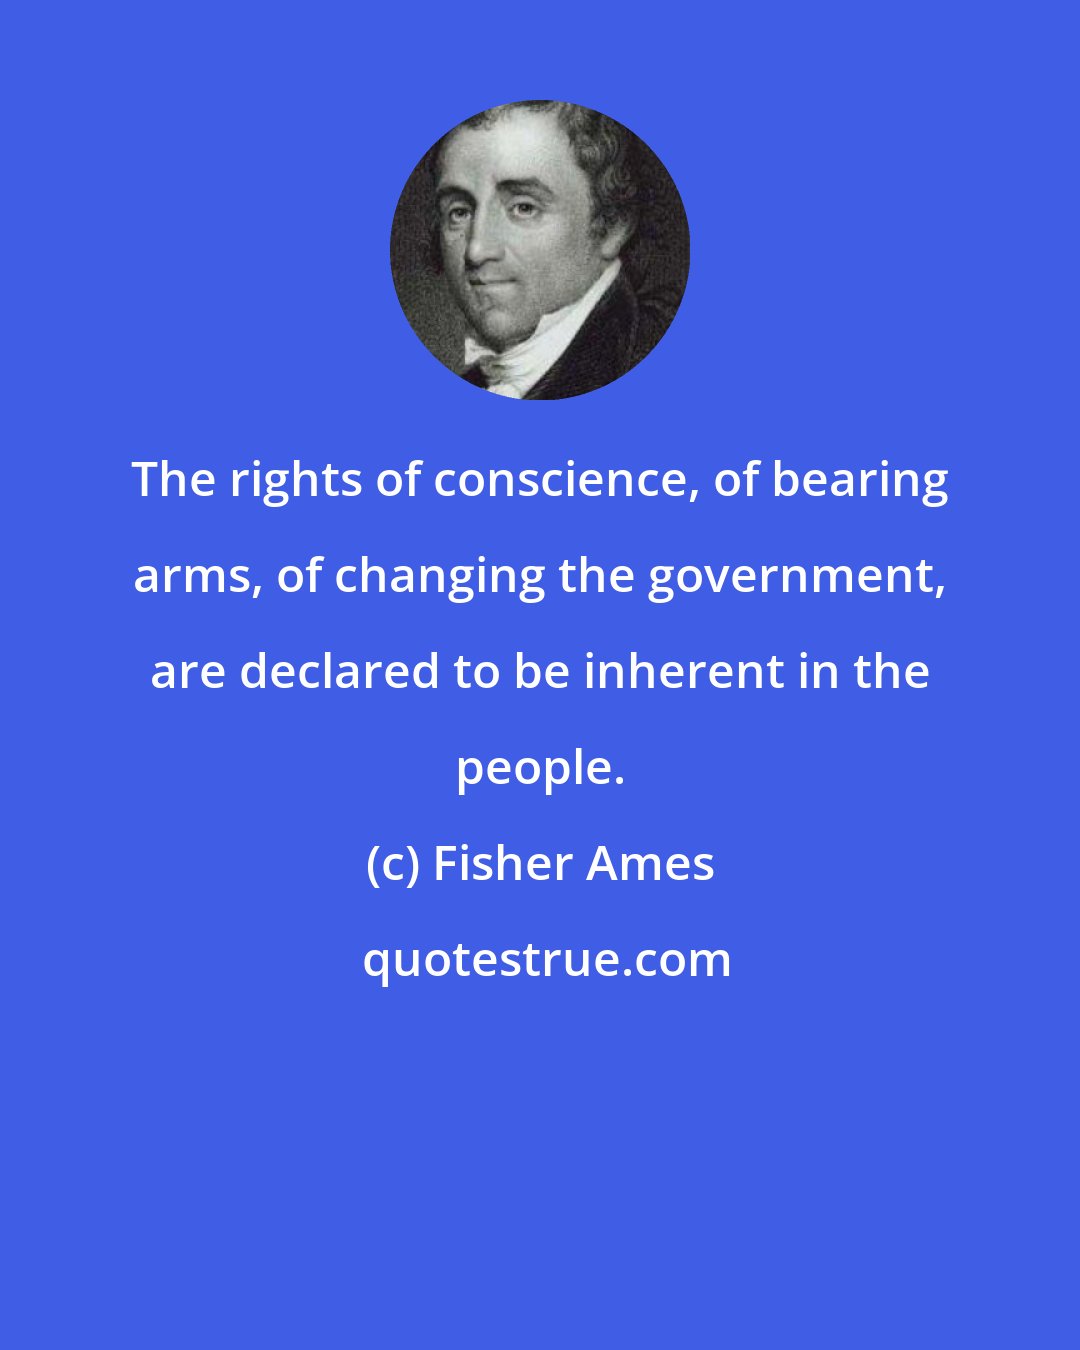 Fisher Ames: The rights of conscience, of bearing arms, of changing the government, are declared to be inherent in the people.